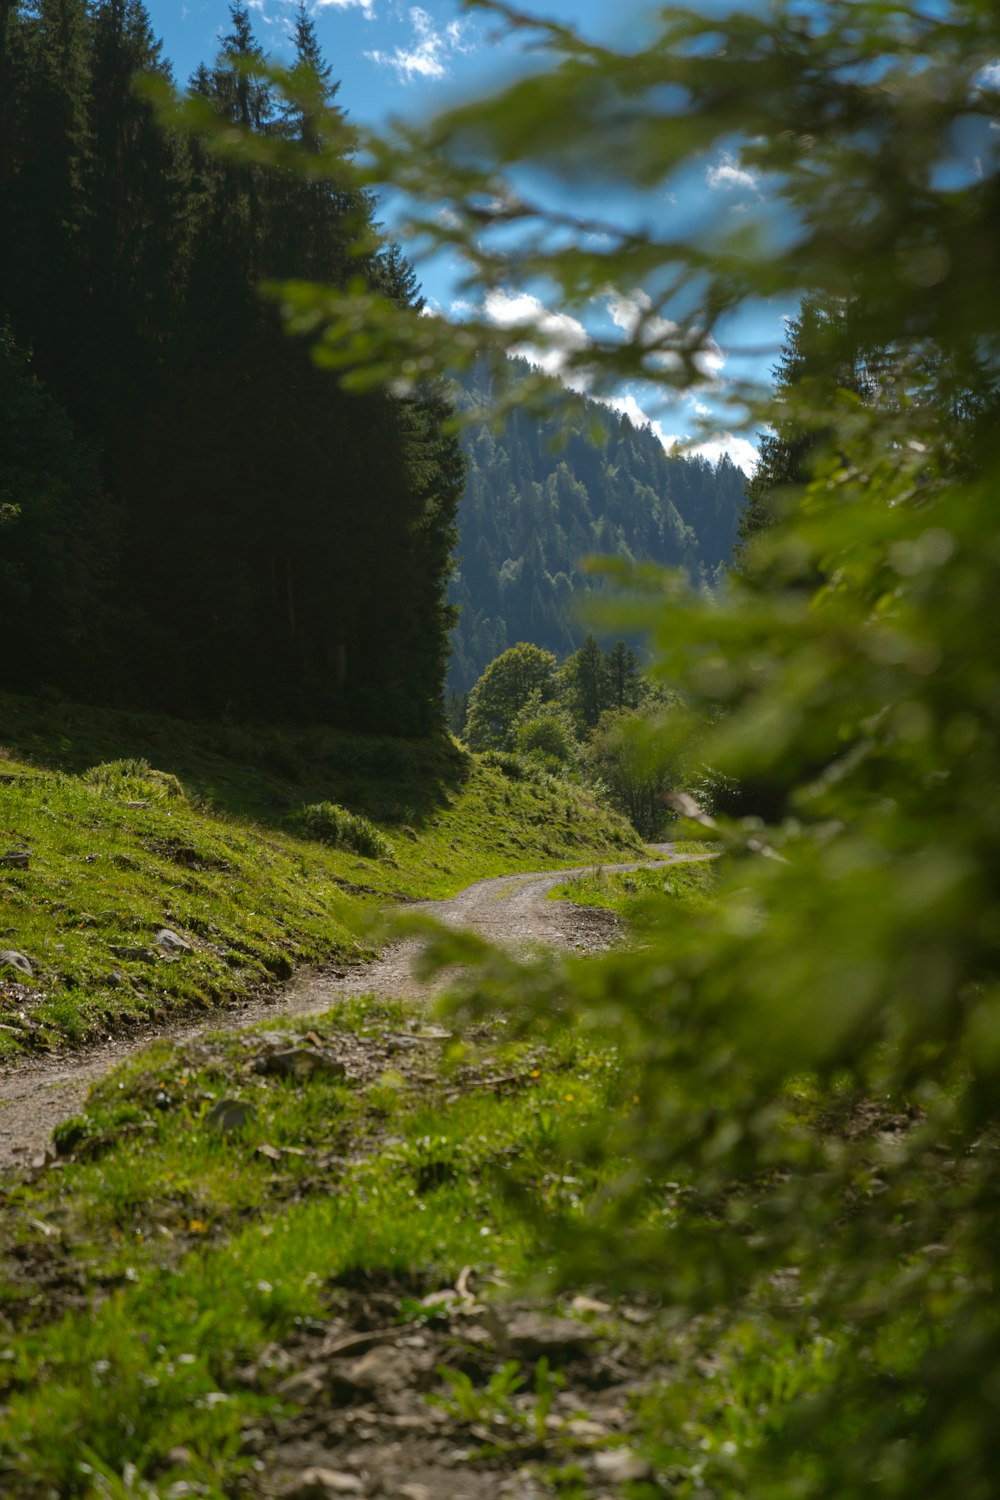 a dirt road in the middle of a lush green forest